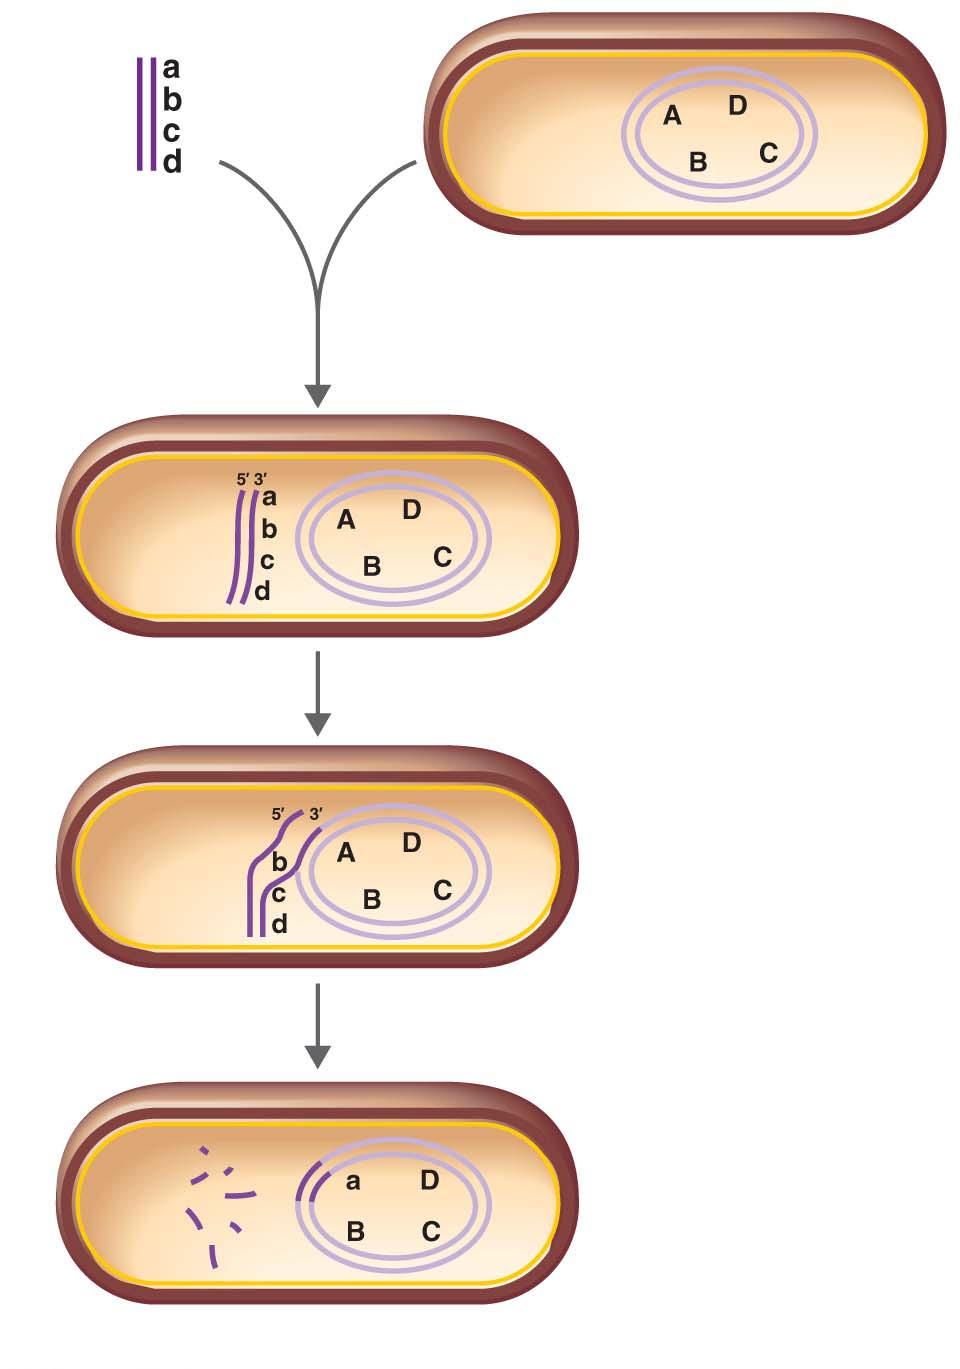 The mechanism of genetic transformation in bacteria. Recipient cell Chromosomal DNA DNA fragments from donor cells Recipient cell takes up donor DNA.